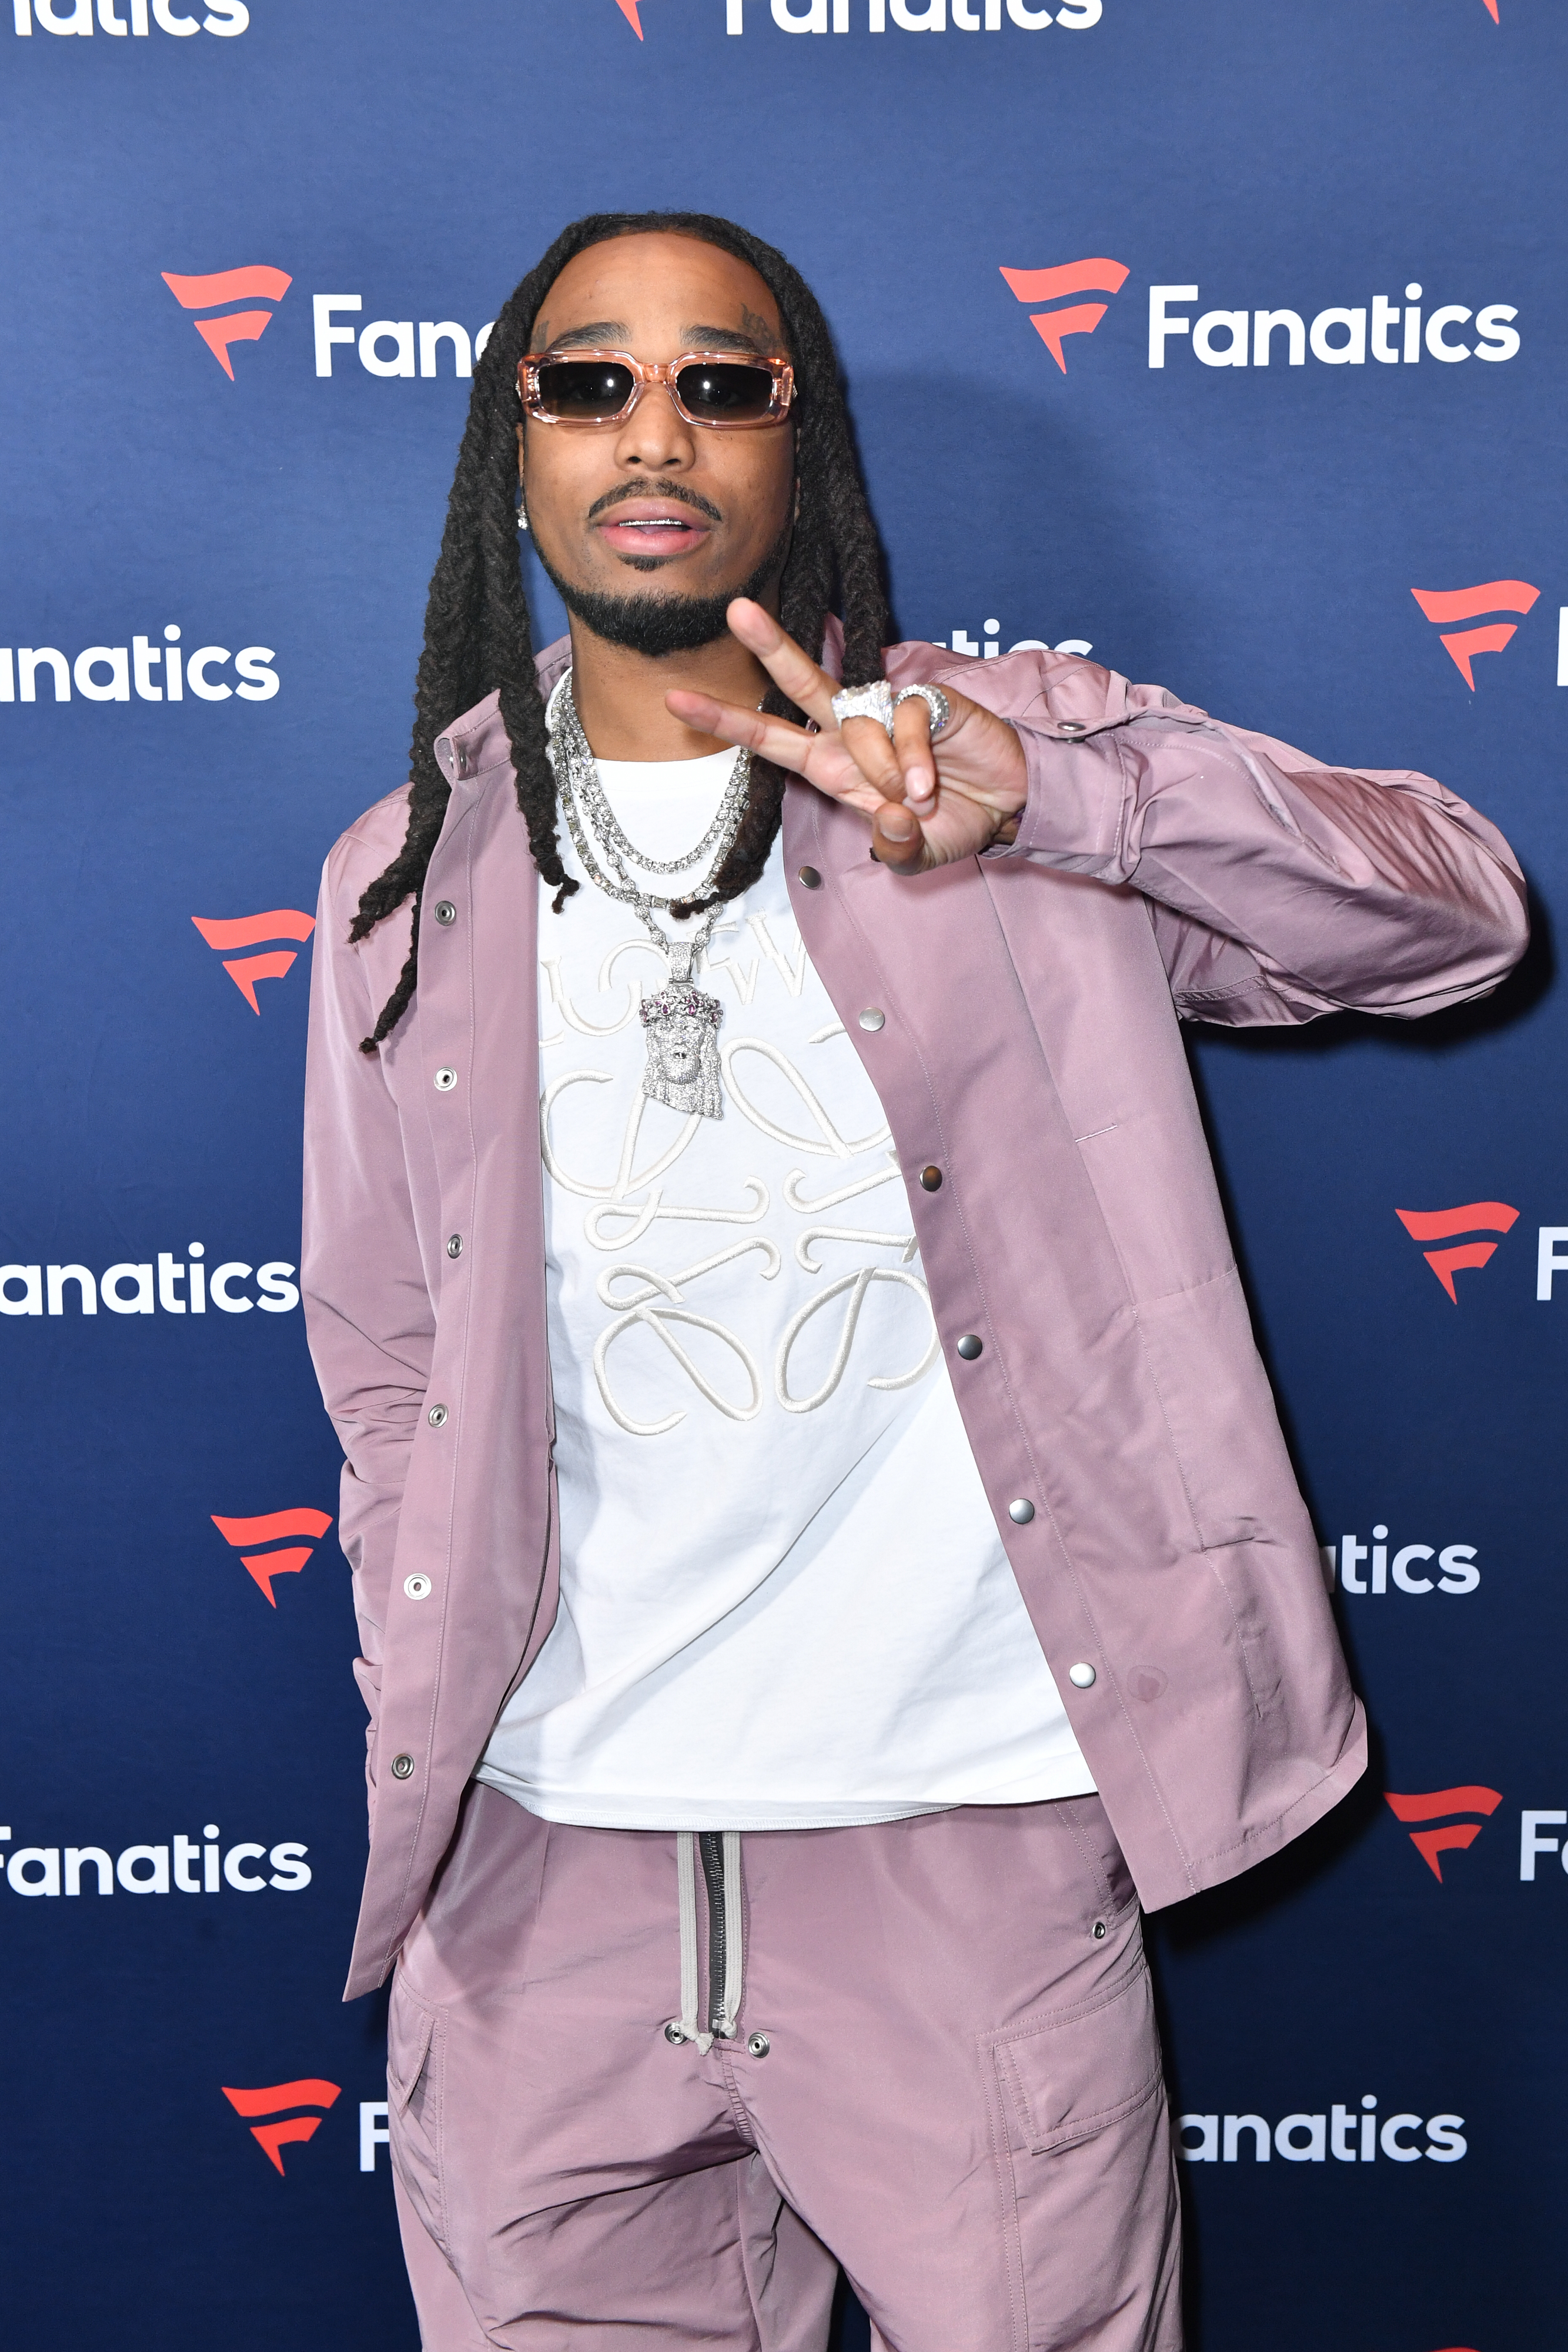 Quavo's Tender included a diss at Chris Brown